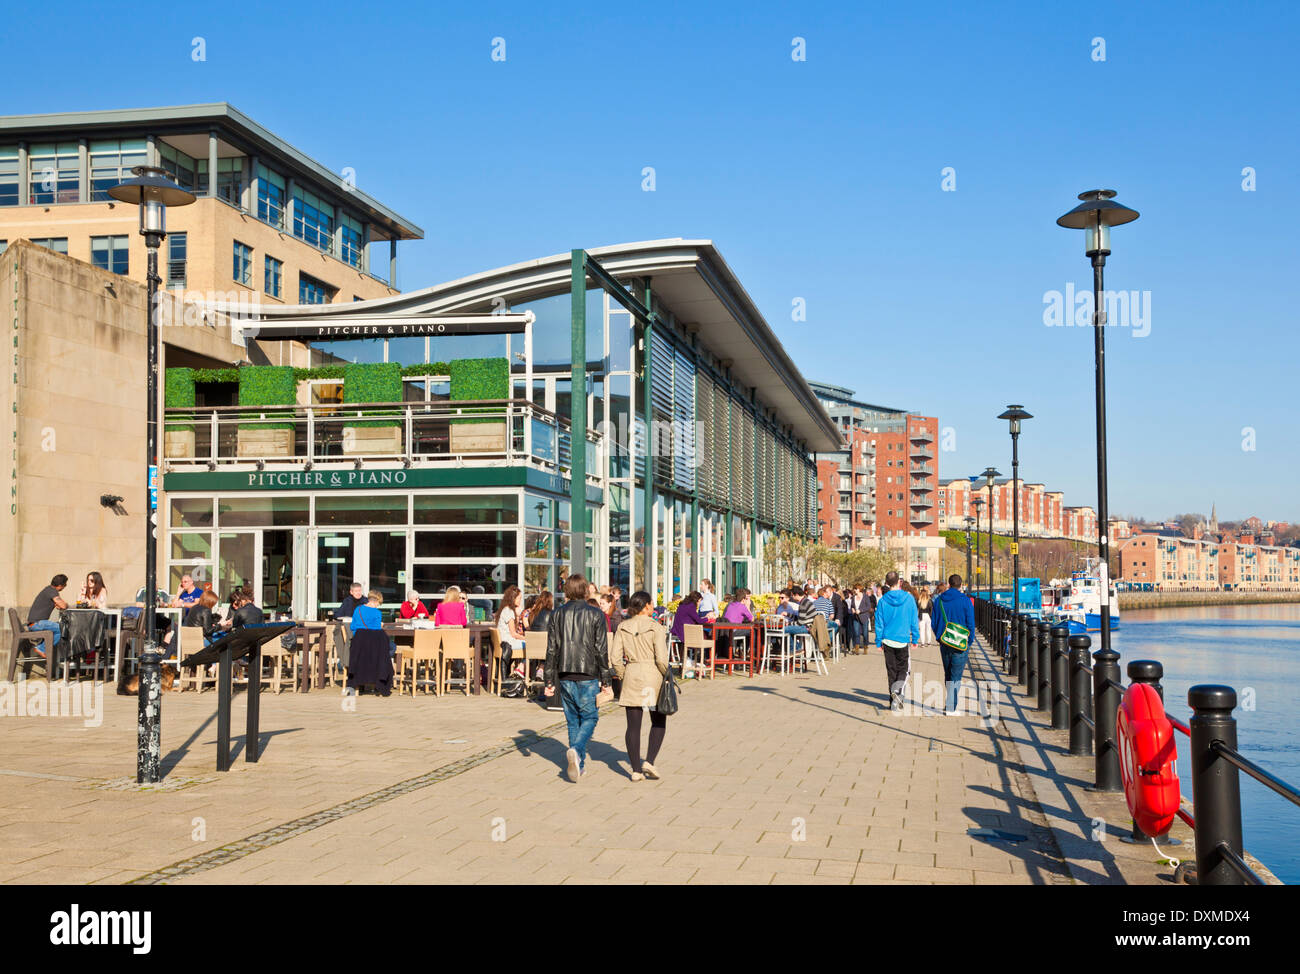 The Pitcher and piano bar and restaurant on the Quayside newcastle upon tyne Tyne and Wear Tyneside England UK GB EU Europe Stock Photo